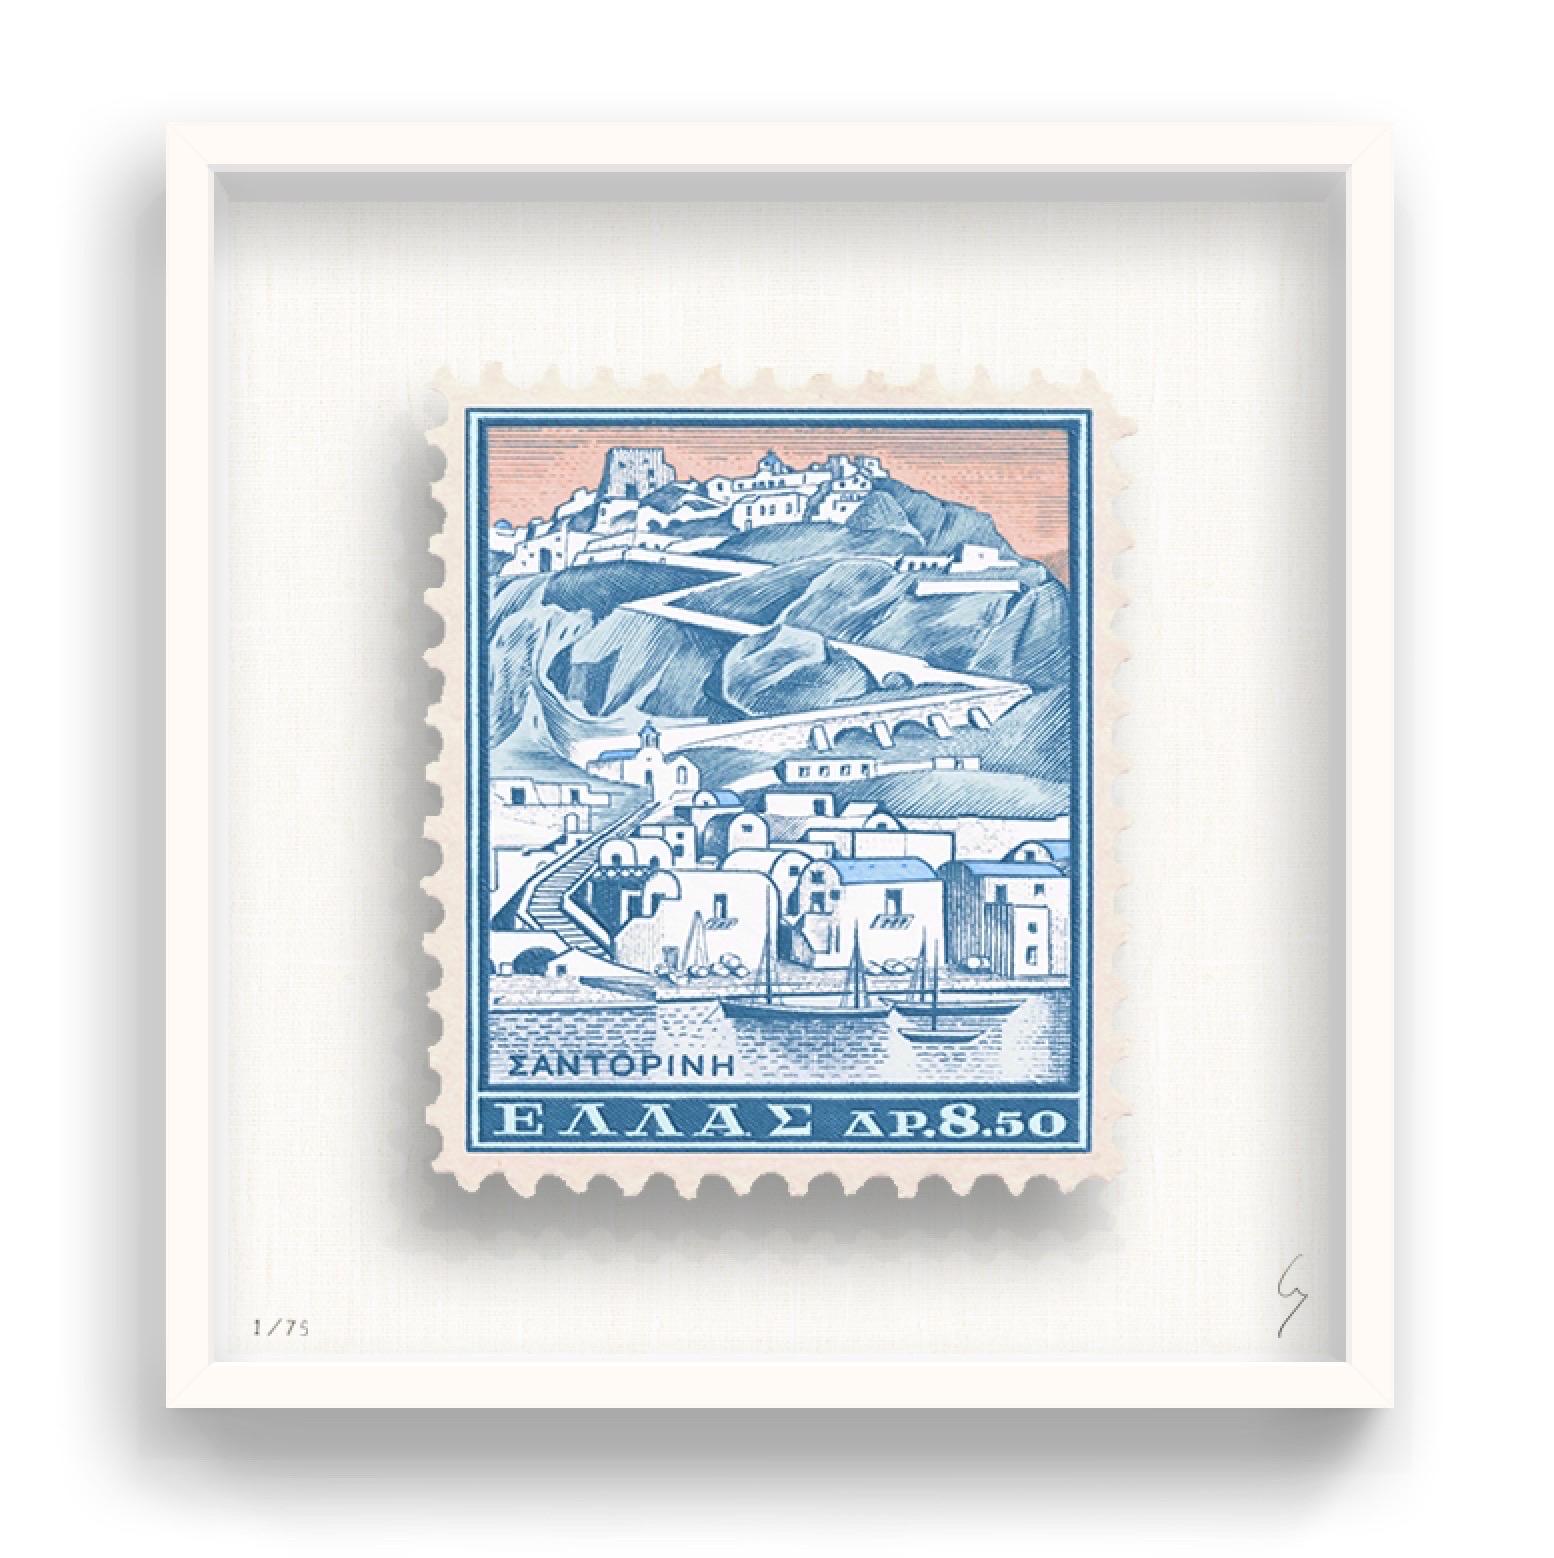 Guy Gee, Santorini (medium)

Hand-engraved print on 350gsm on G.F Smith card
31 x 35 cm (12 1/5 x 13 4/5)
Frame included 
Edition of 75 

Each artwork by Guy had been digitally reimagined from an original postage stamp. Cut out and finished by hand,